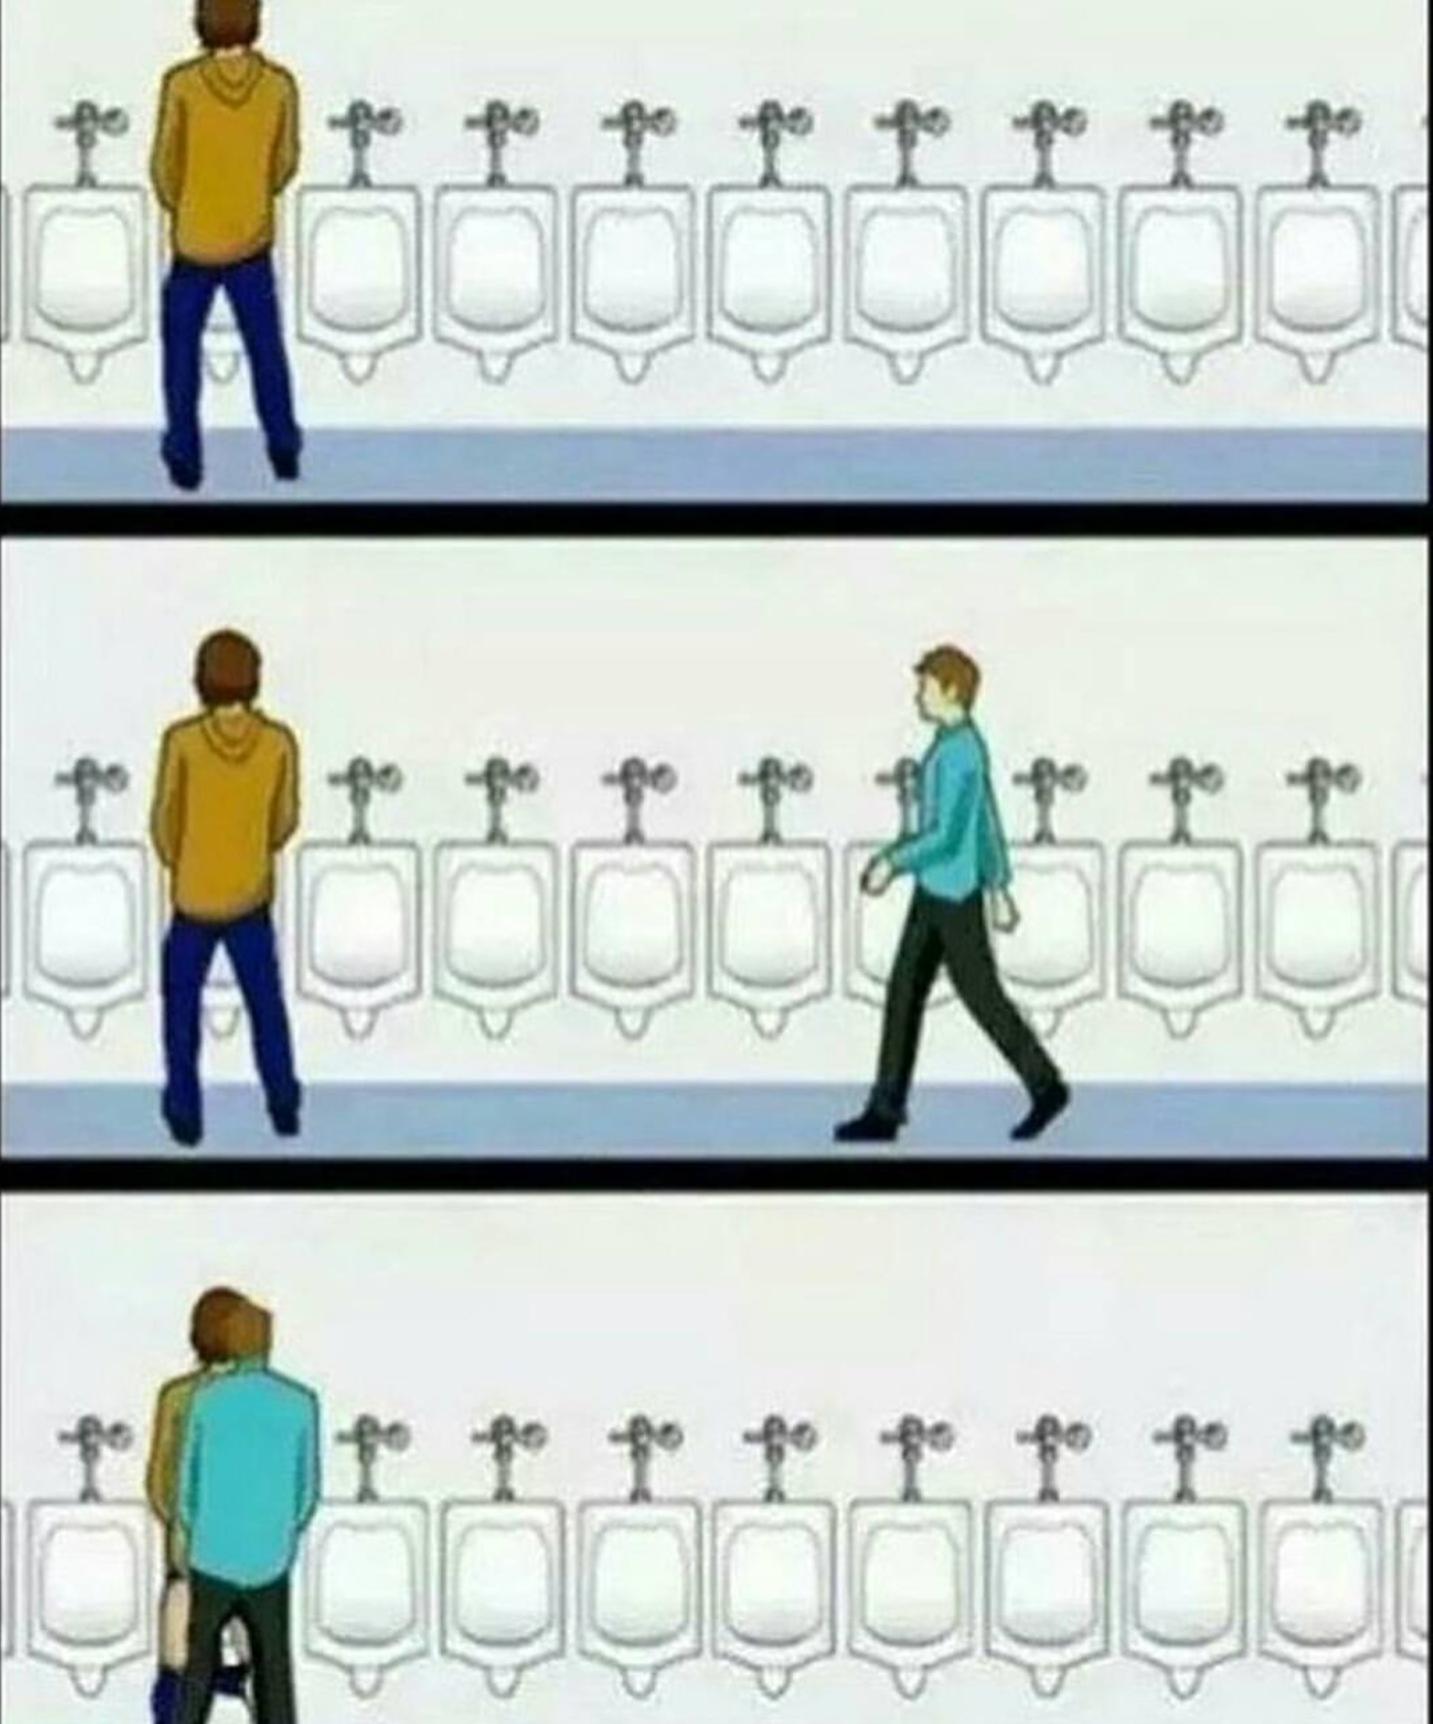 When someone doesn't know proper urinal etiquette